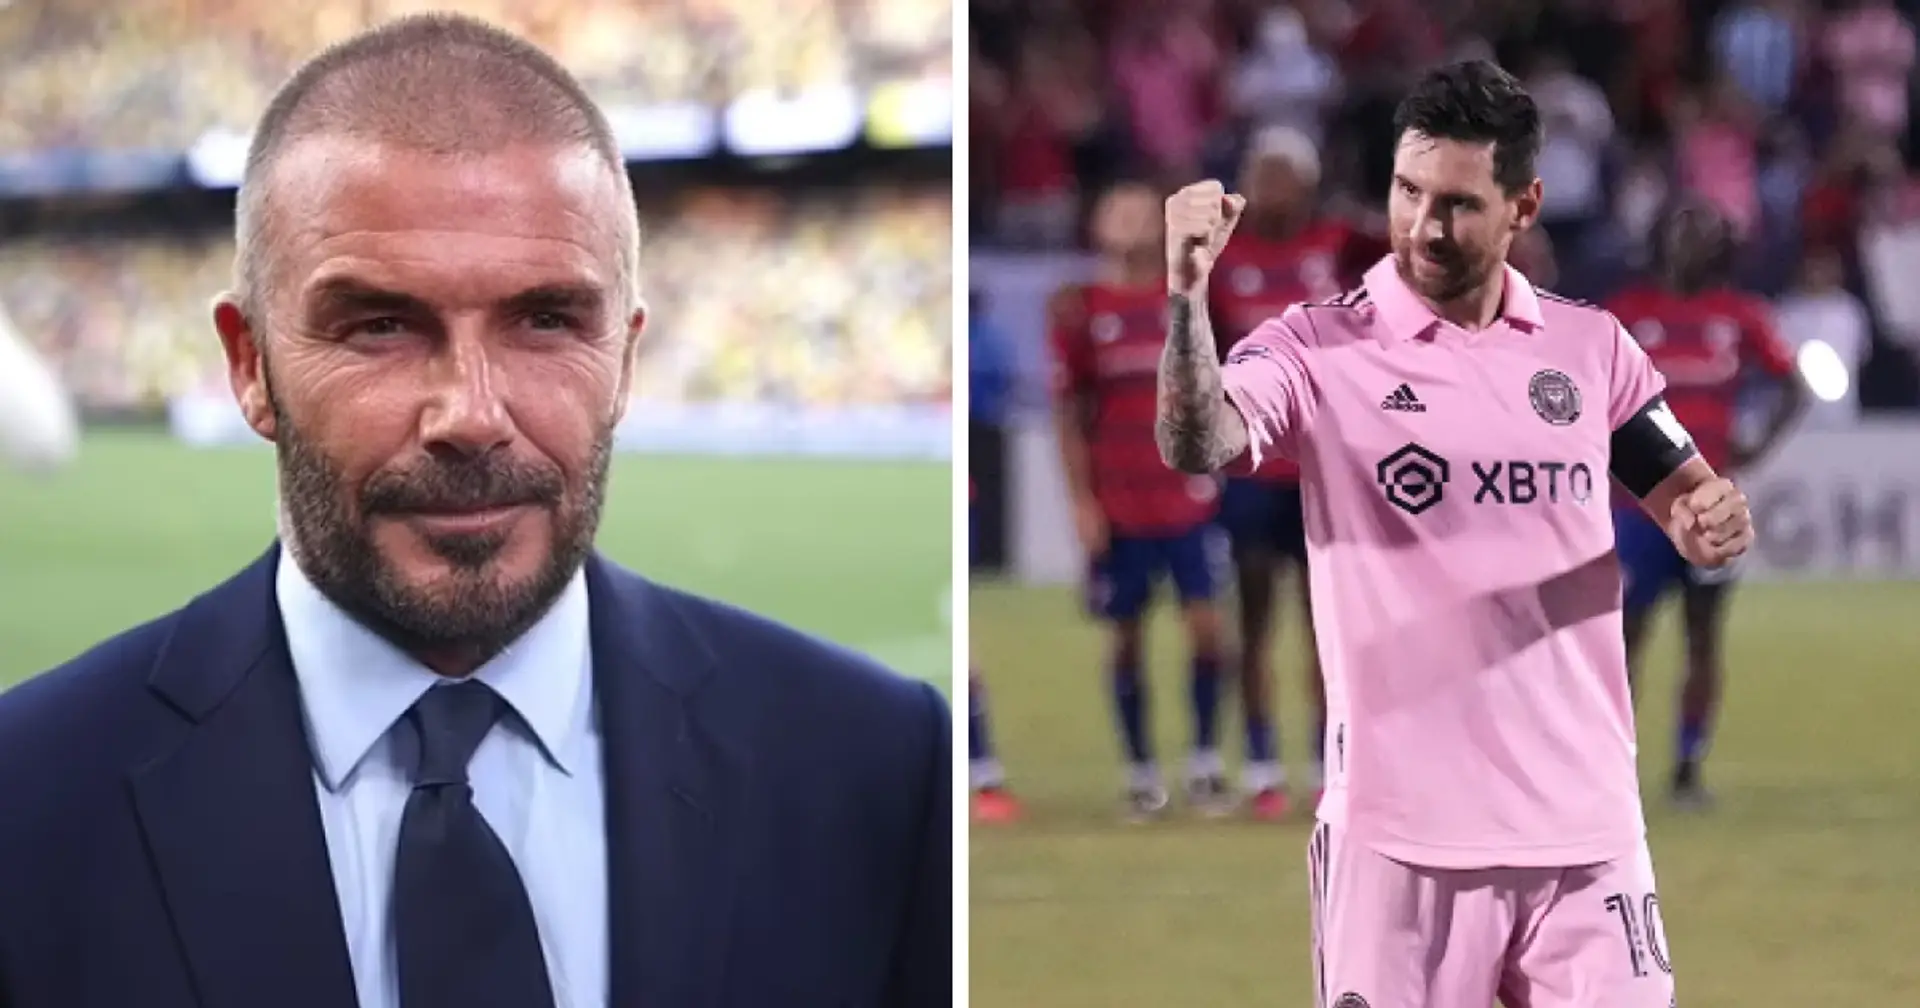 David Beckham makes his feelings clear with a heartfelt message after Inter Miami game